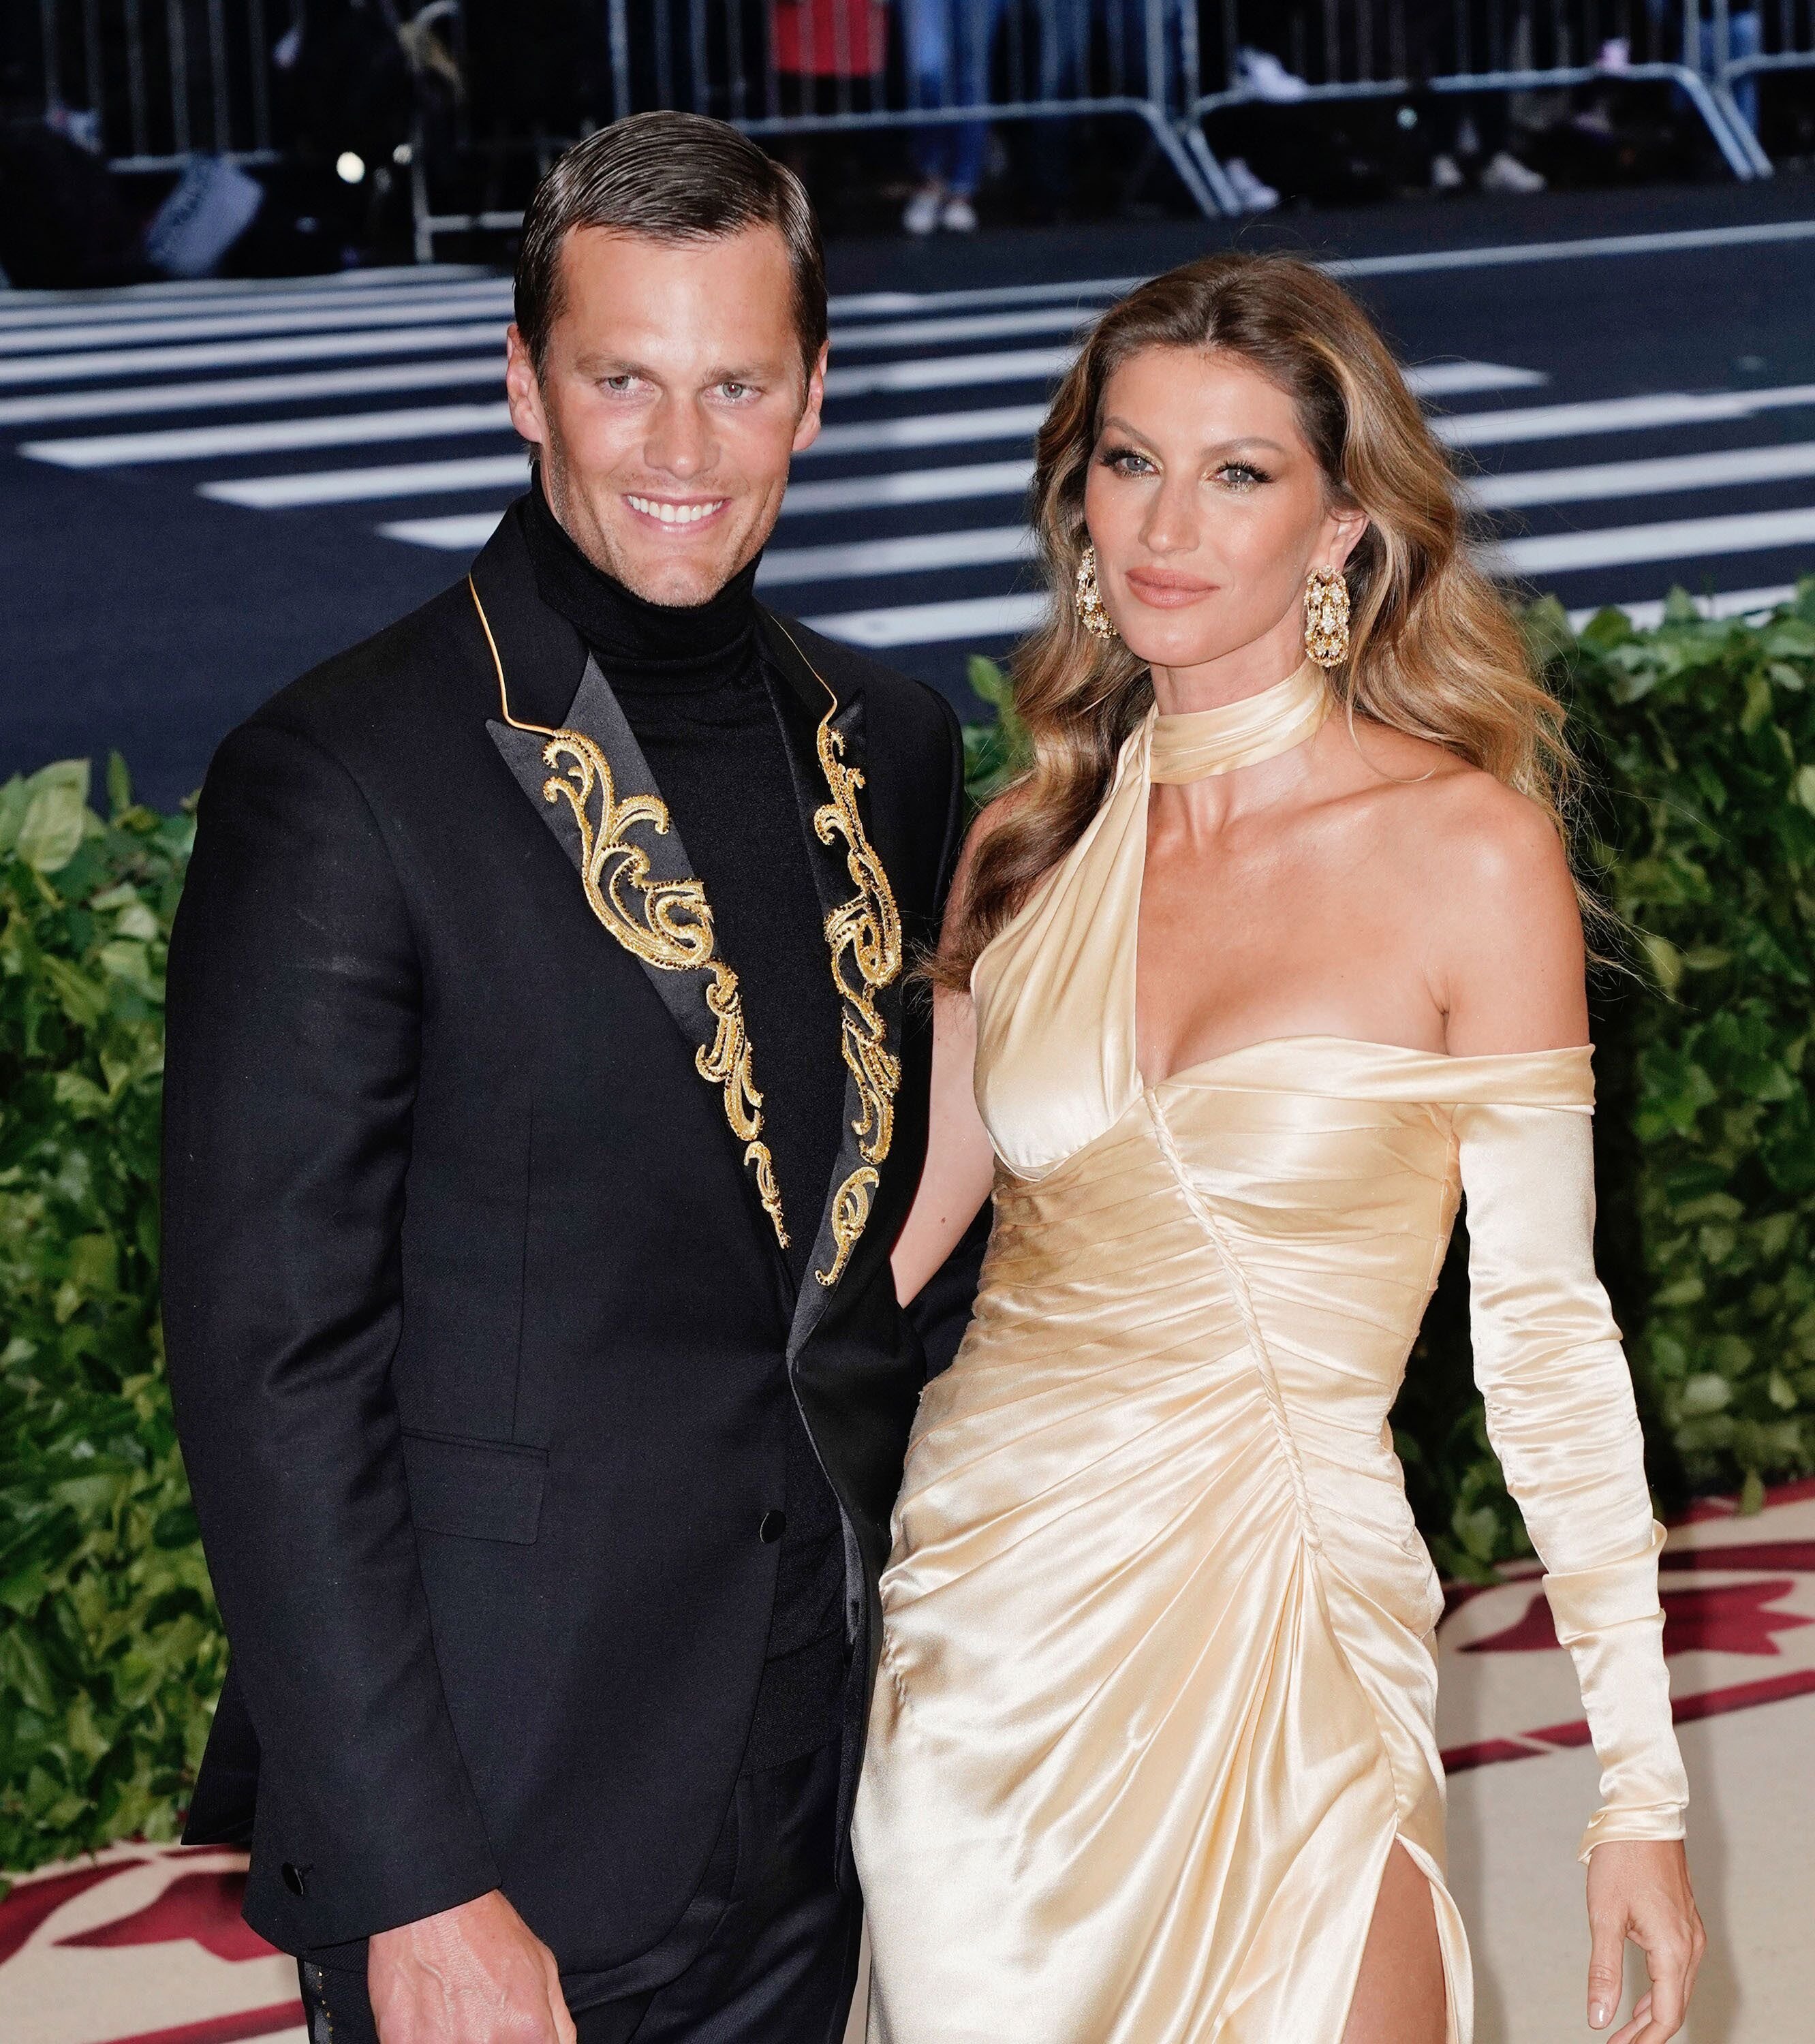 Gisele Bundchen and Tom Brady attend the Heavenly Bodies: Fashion & The Catholic Imagination Costume Institute Gala. | Source: Getty Images